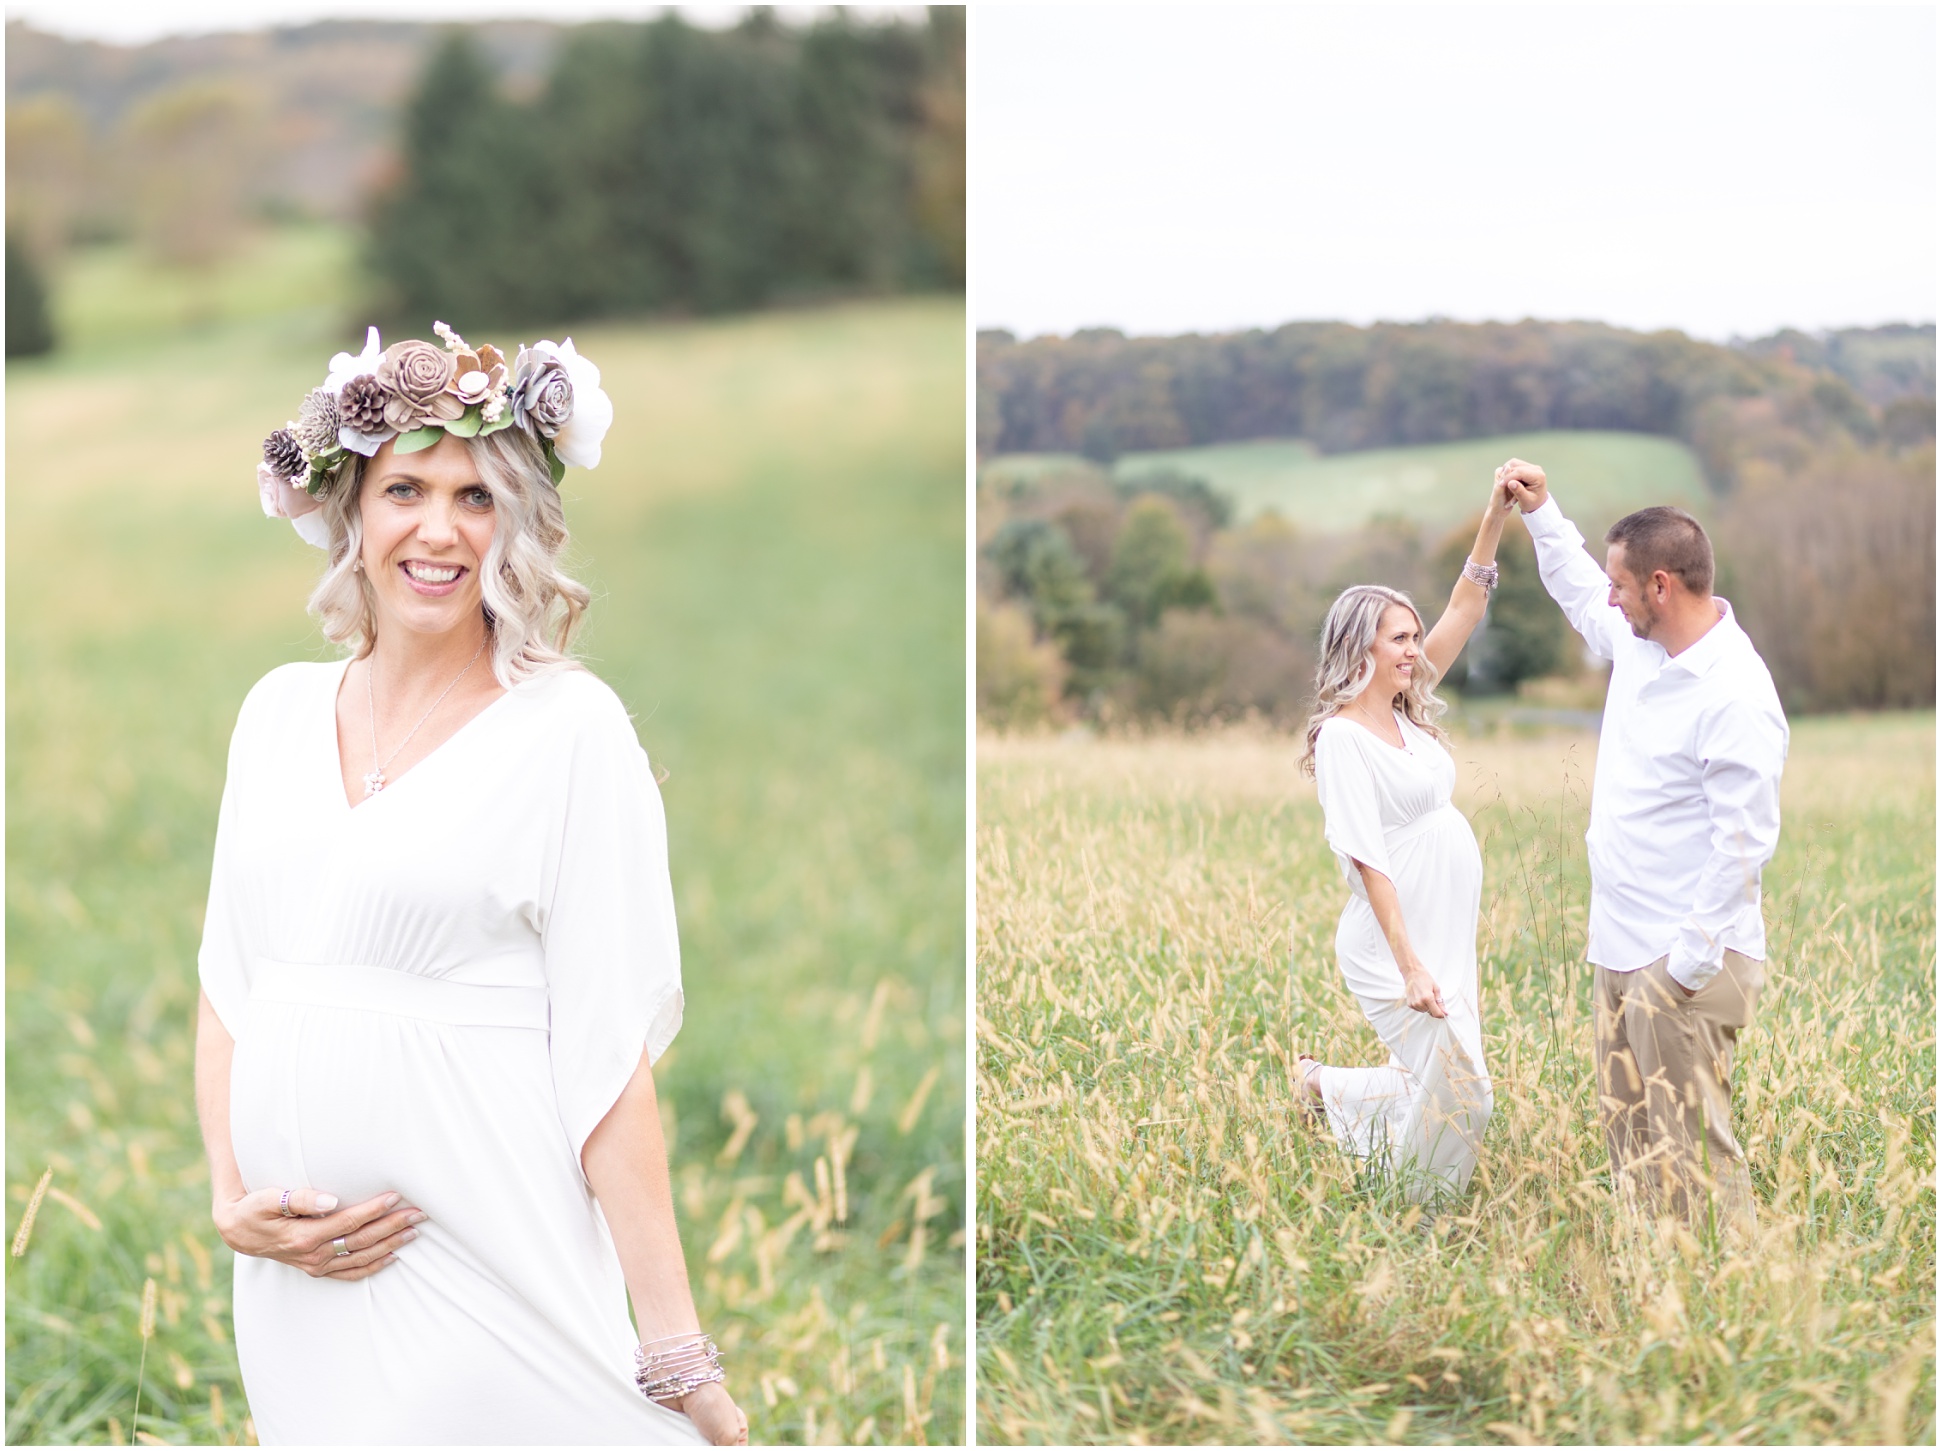 Maternity session with white maternity dress and fall flower crown